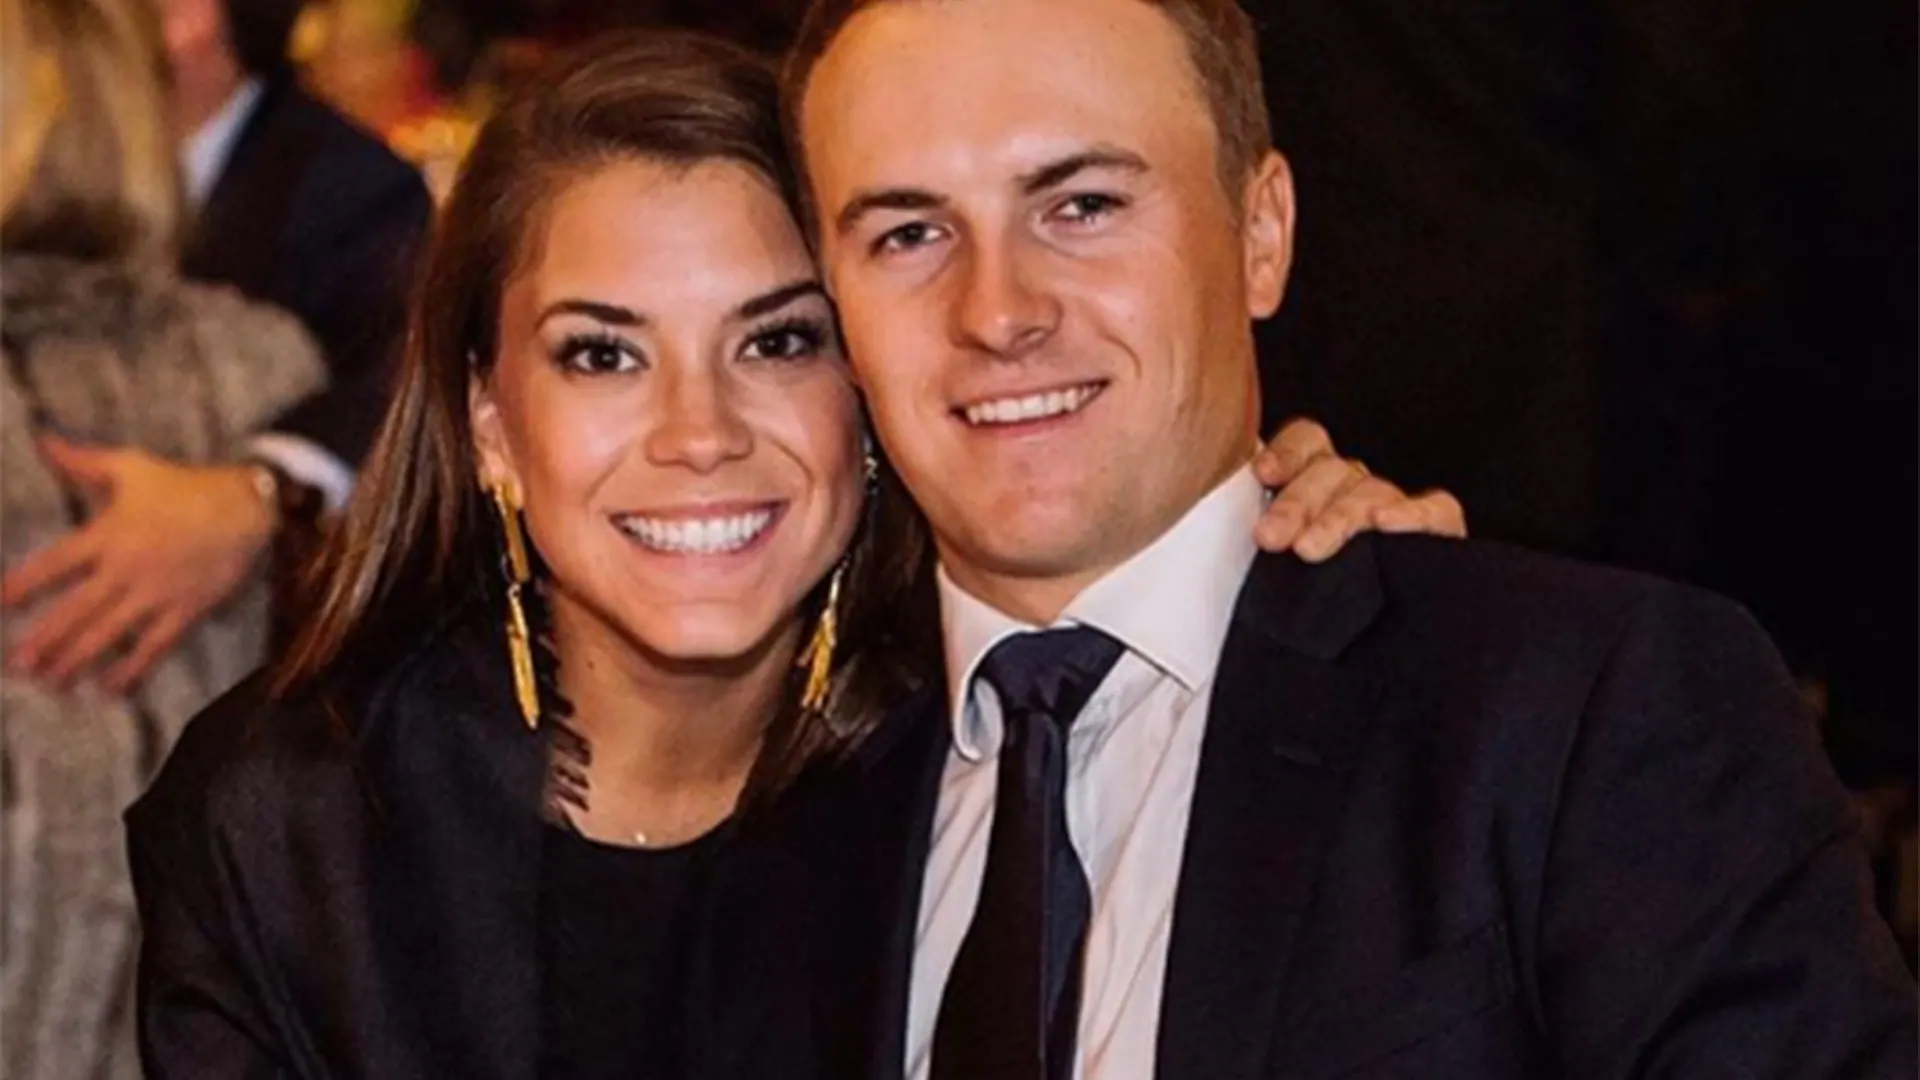 Photo: Spieth, Verret appear to be engaged